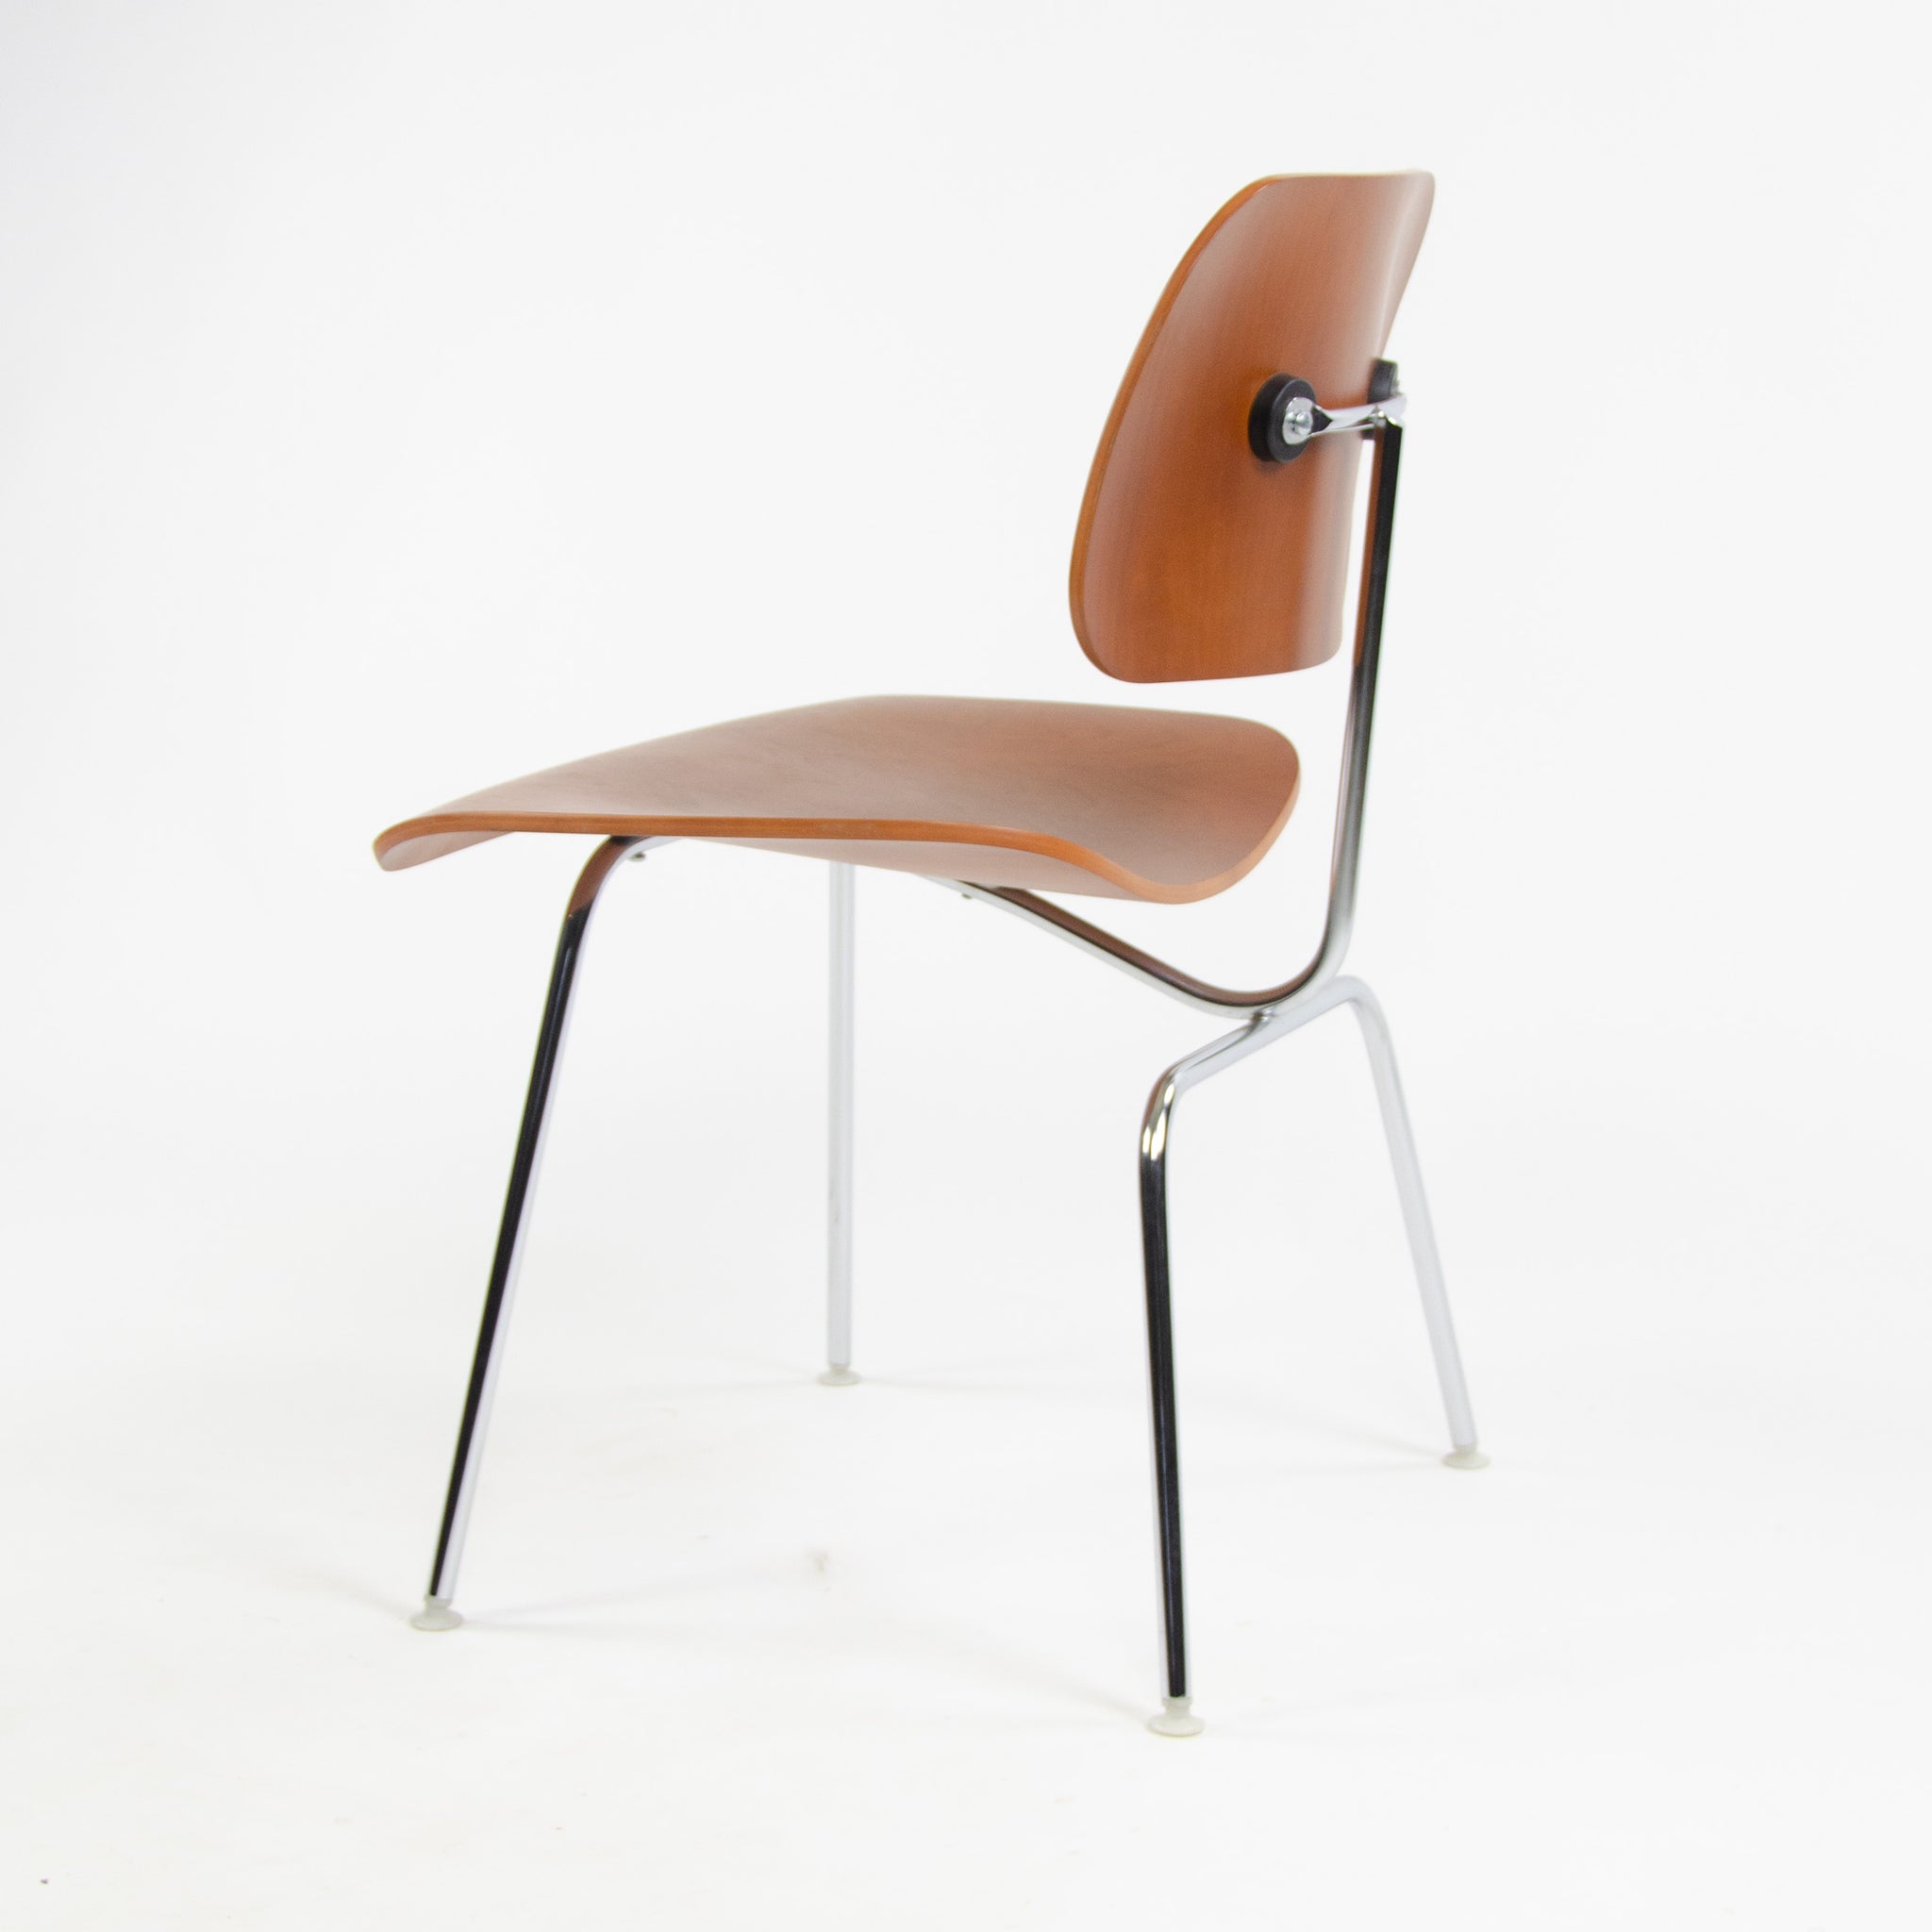 SOLD Late 2000's Eames Herman Miller DCM Chair Cherry